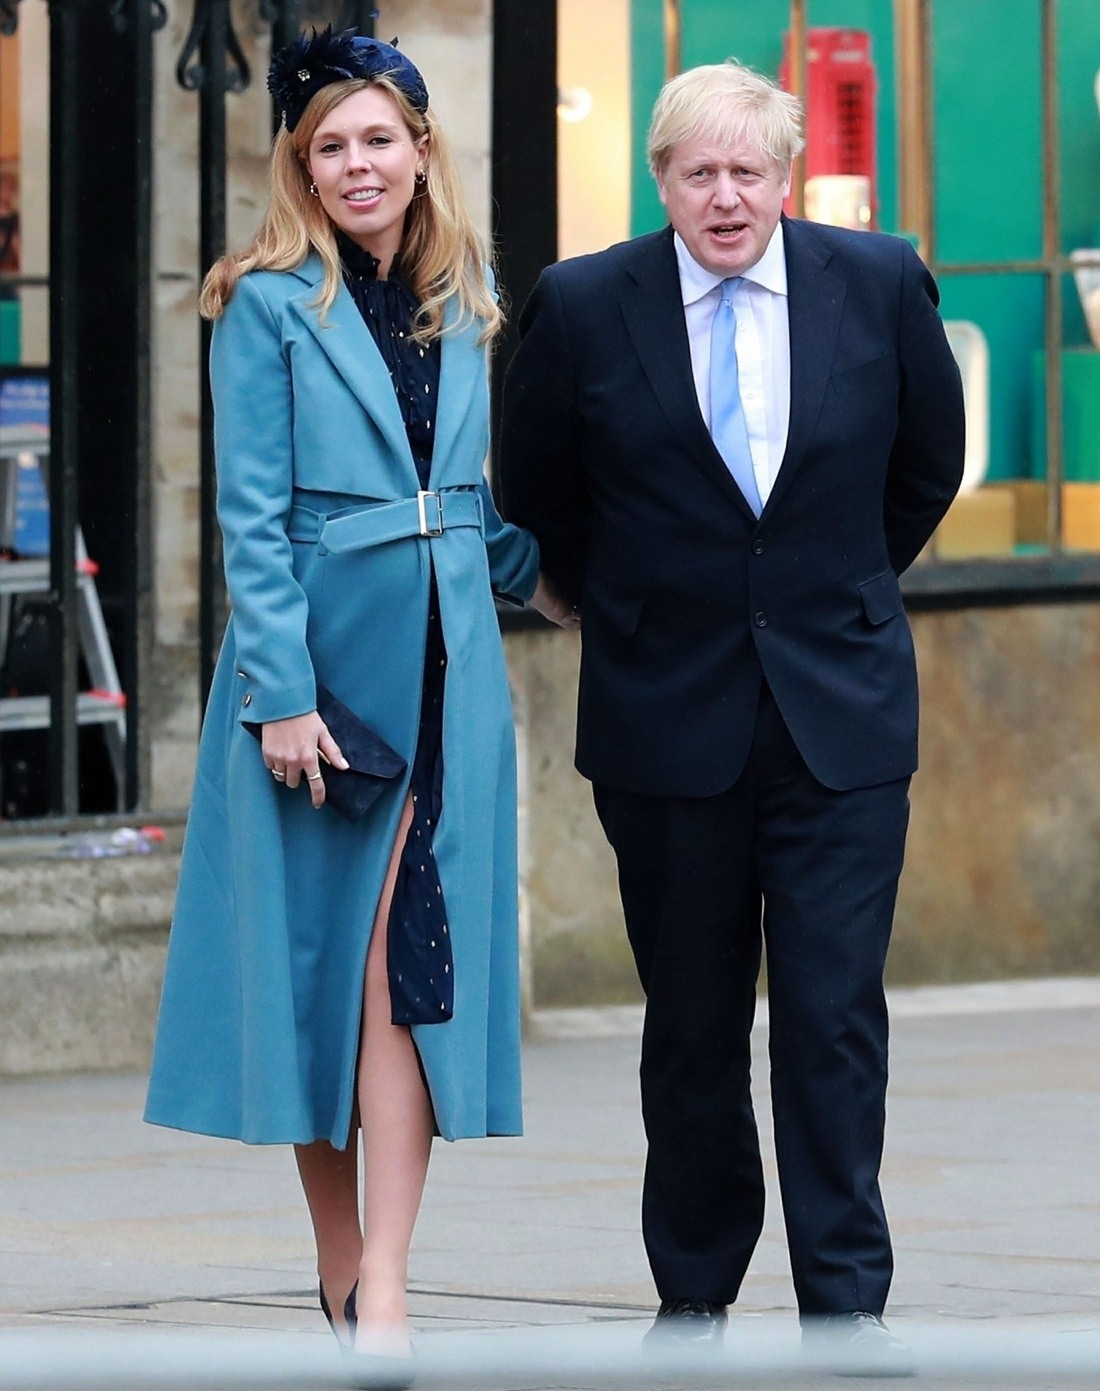 Boris Johnson and his pregnant fiancee Carrie Symonds are seen leaving Westminster Abbey